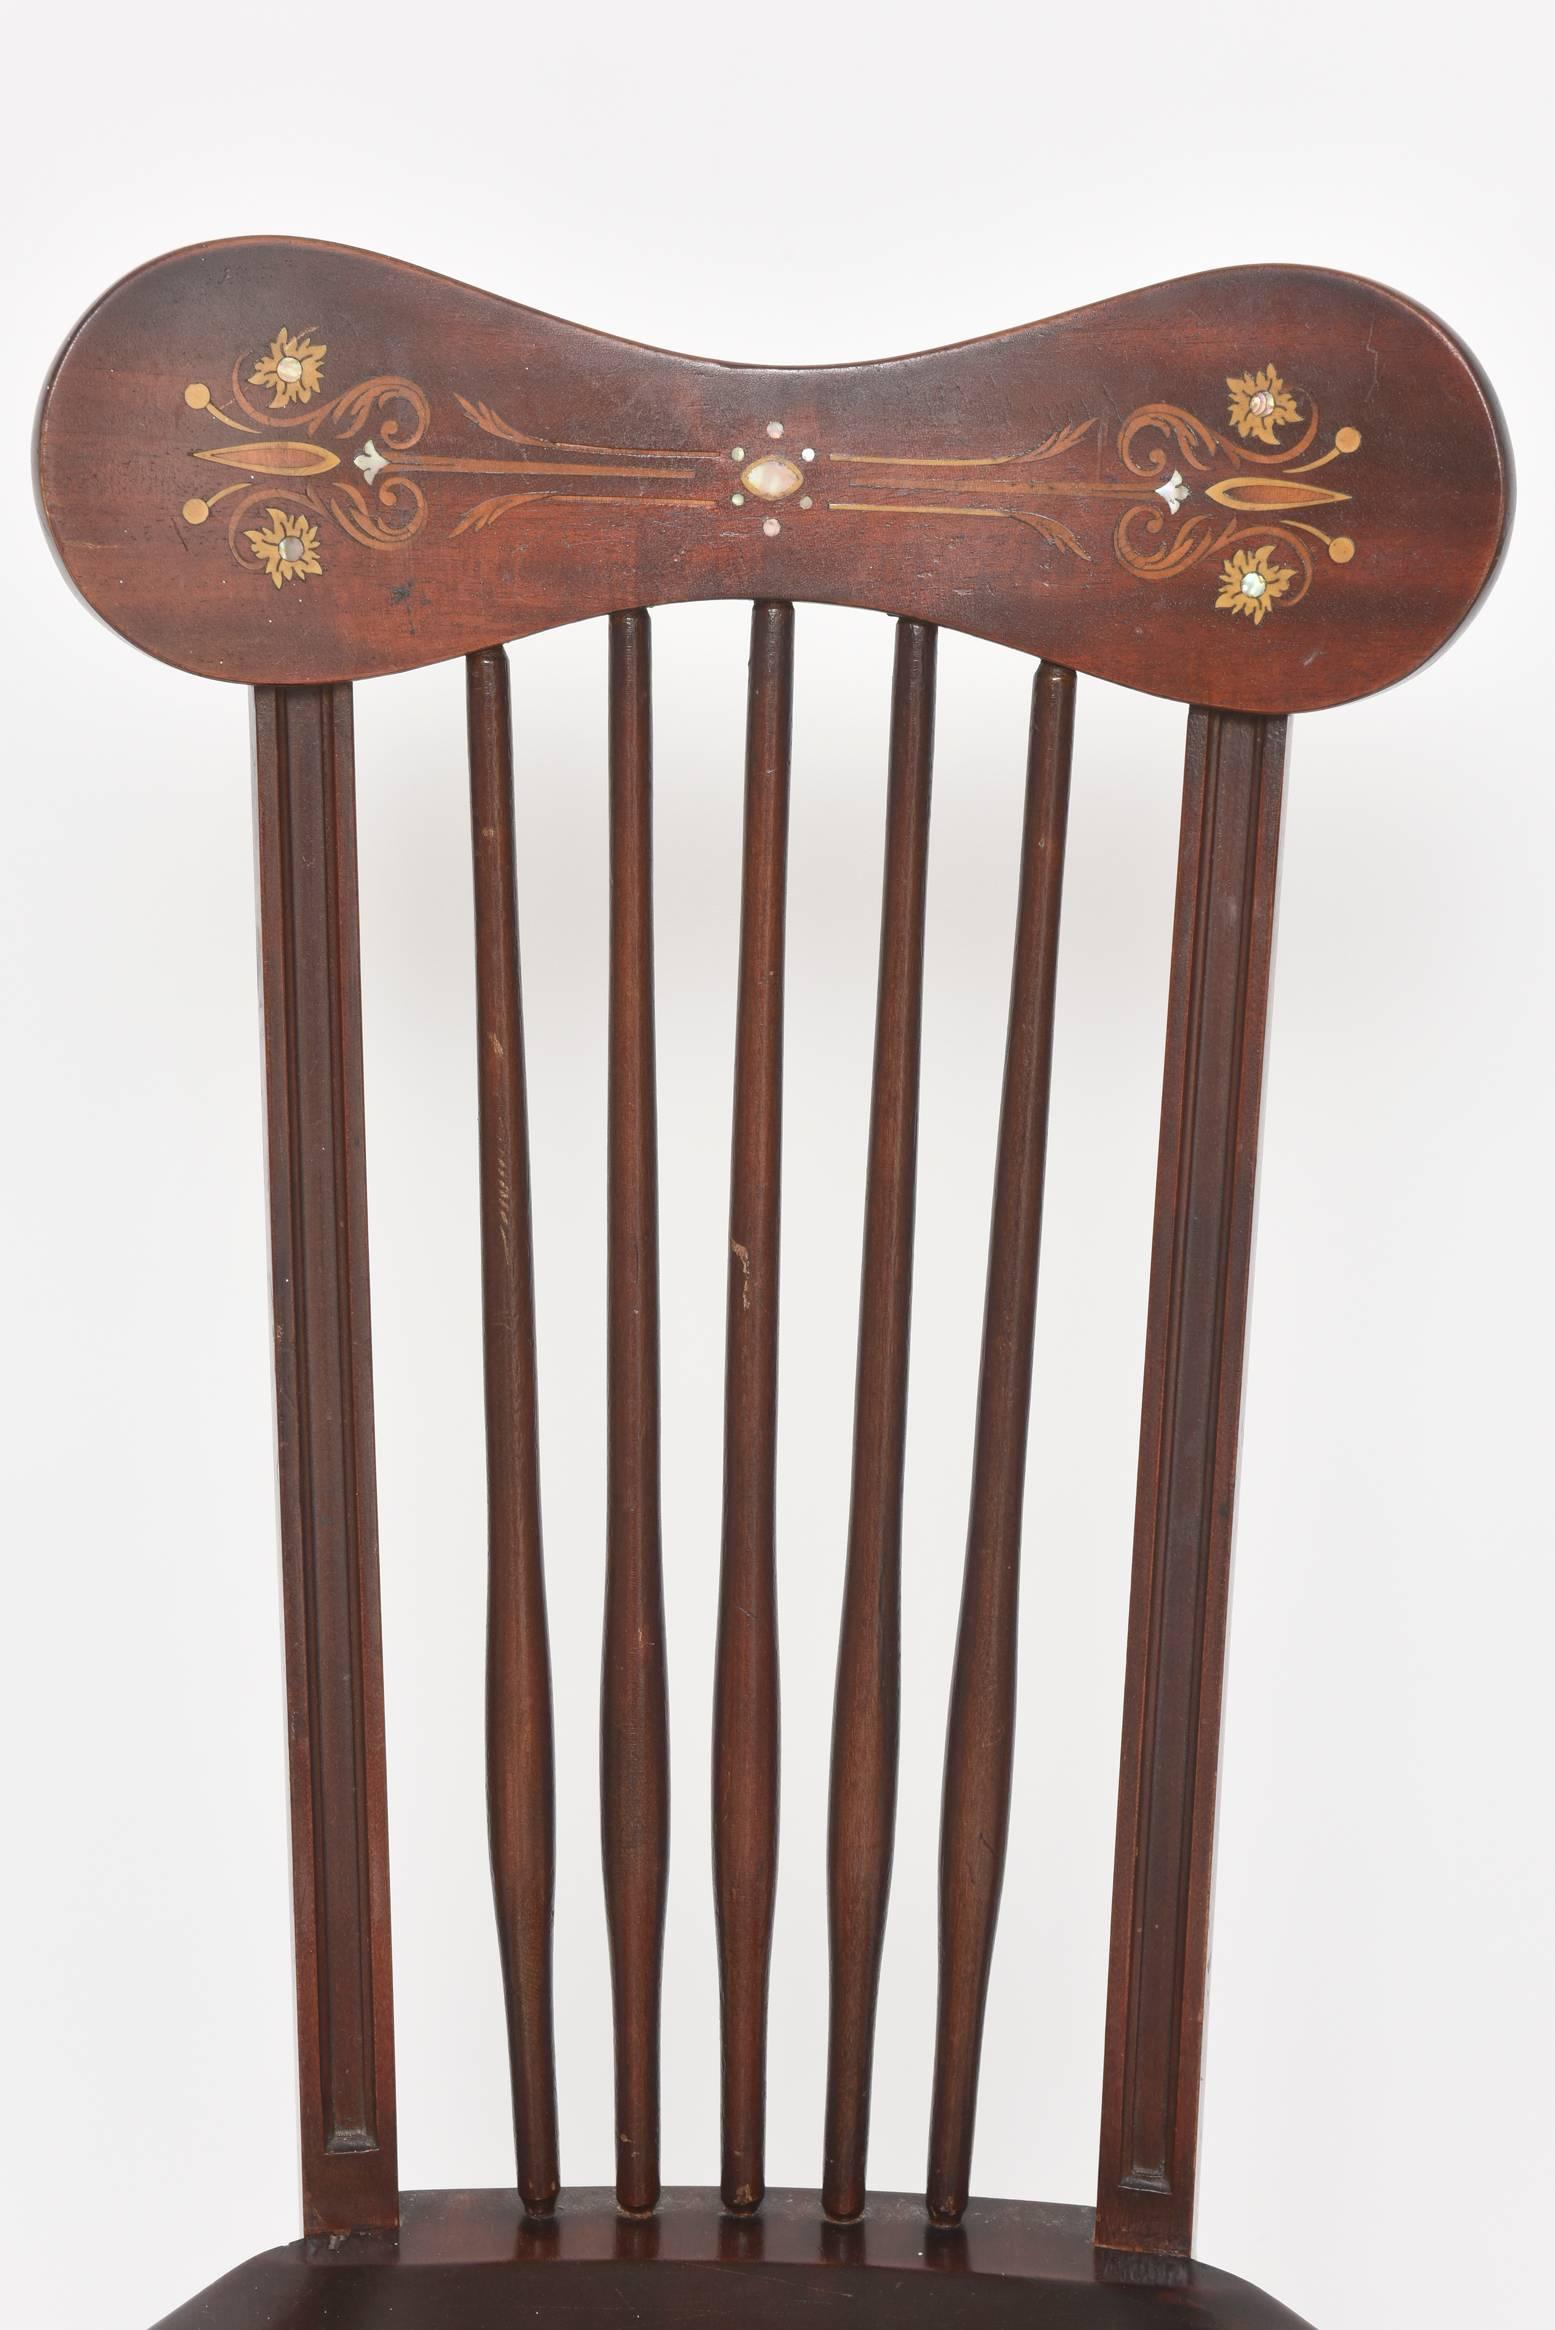 Marquetry Antique Mother-of-Pearl Inlaid Windsor Side Chair Spindle Back Saddle Seat For Sale